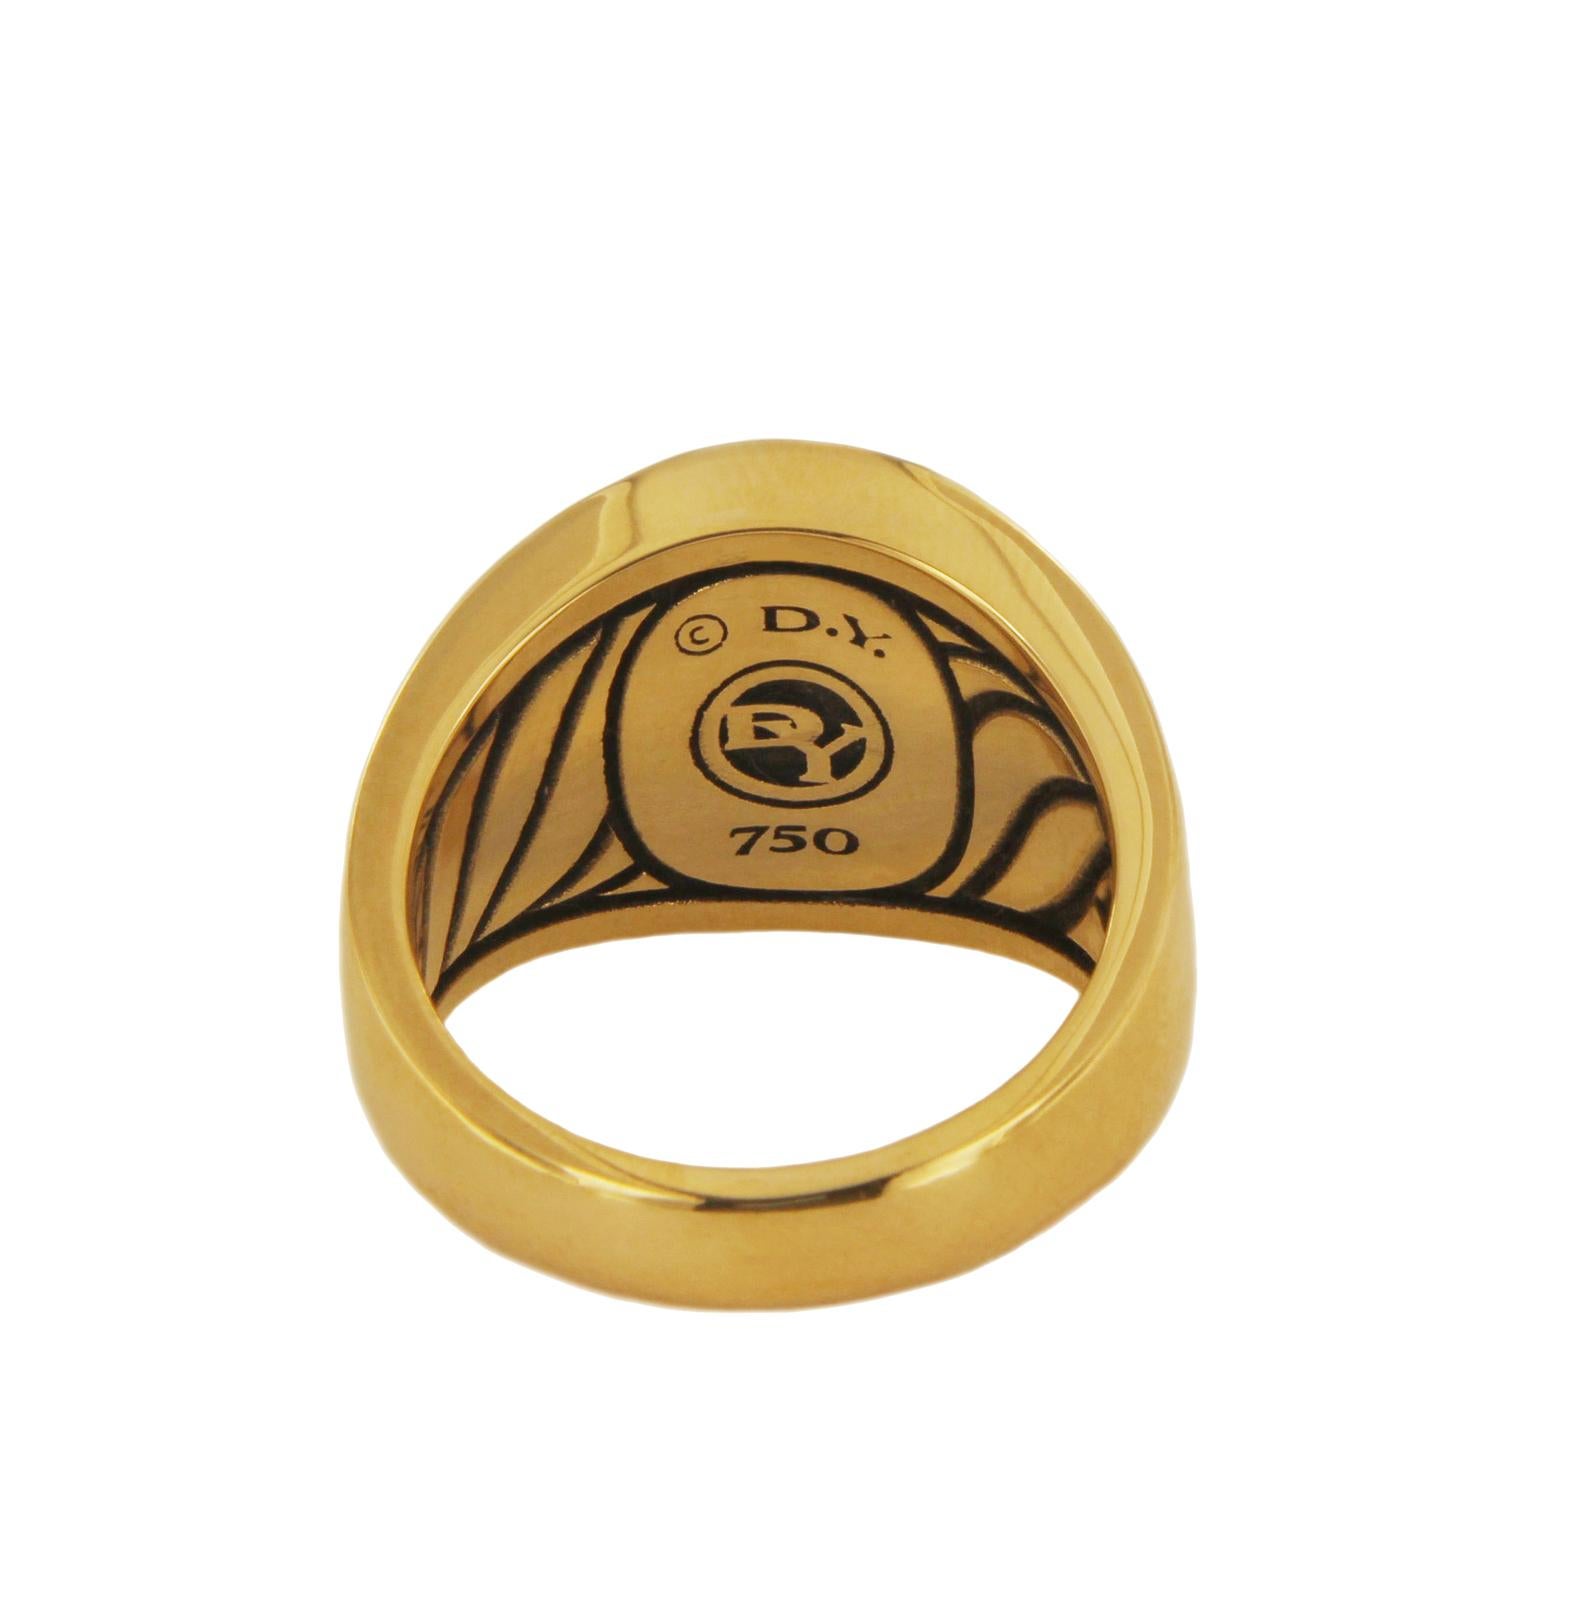 -Material: 18k Yellow Gold
-Ring size: 7 3/4
-Black Onyx: 11x14mm
-Ring weight: 18.3gr
-Ring width: 4.8-16mm

*Includes David Yurman Box.